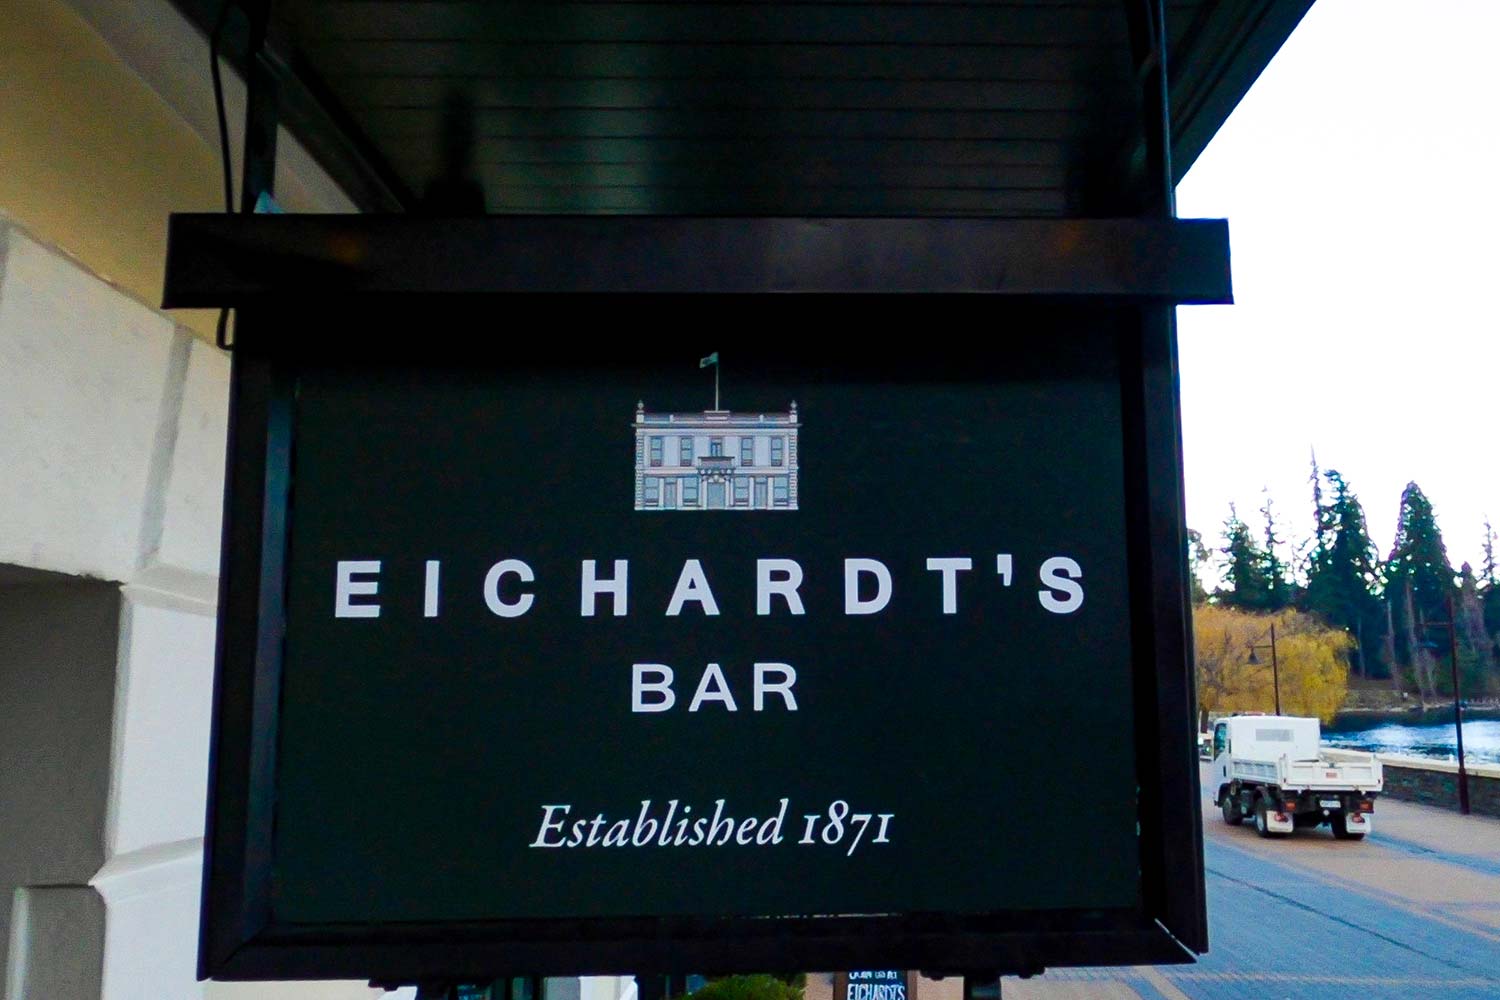 A hanging green shingle with white writing say Eichardt's Bar